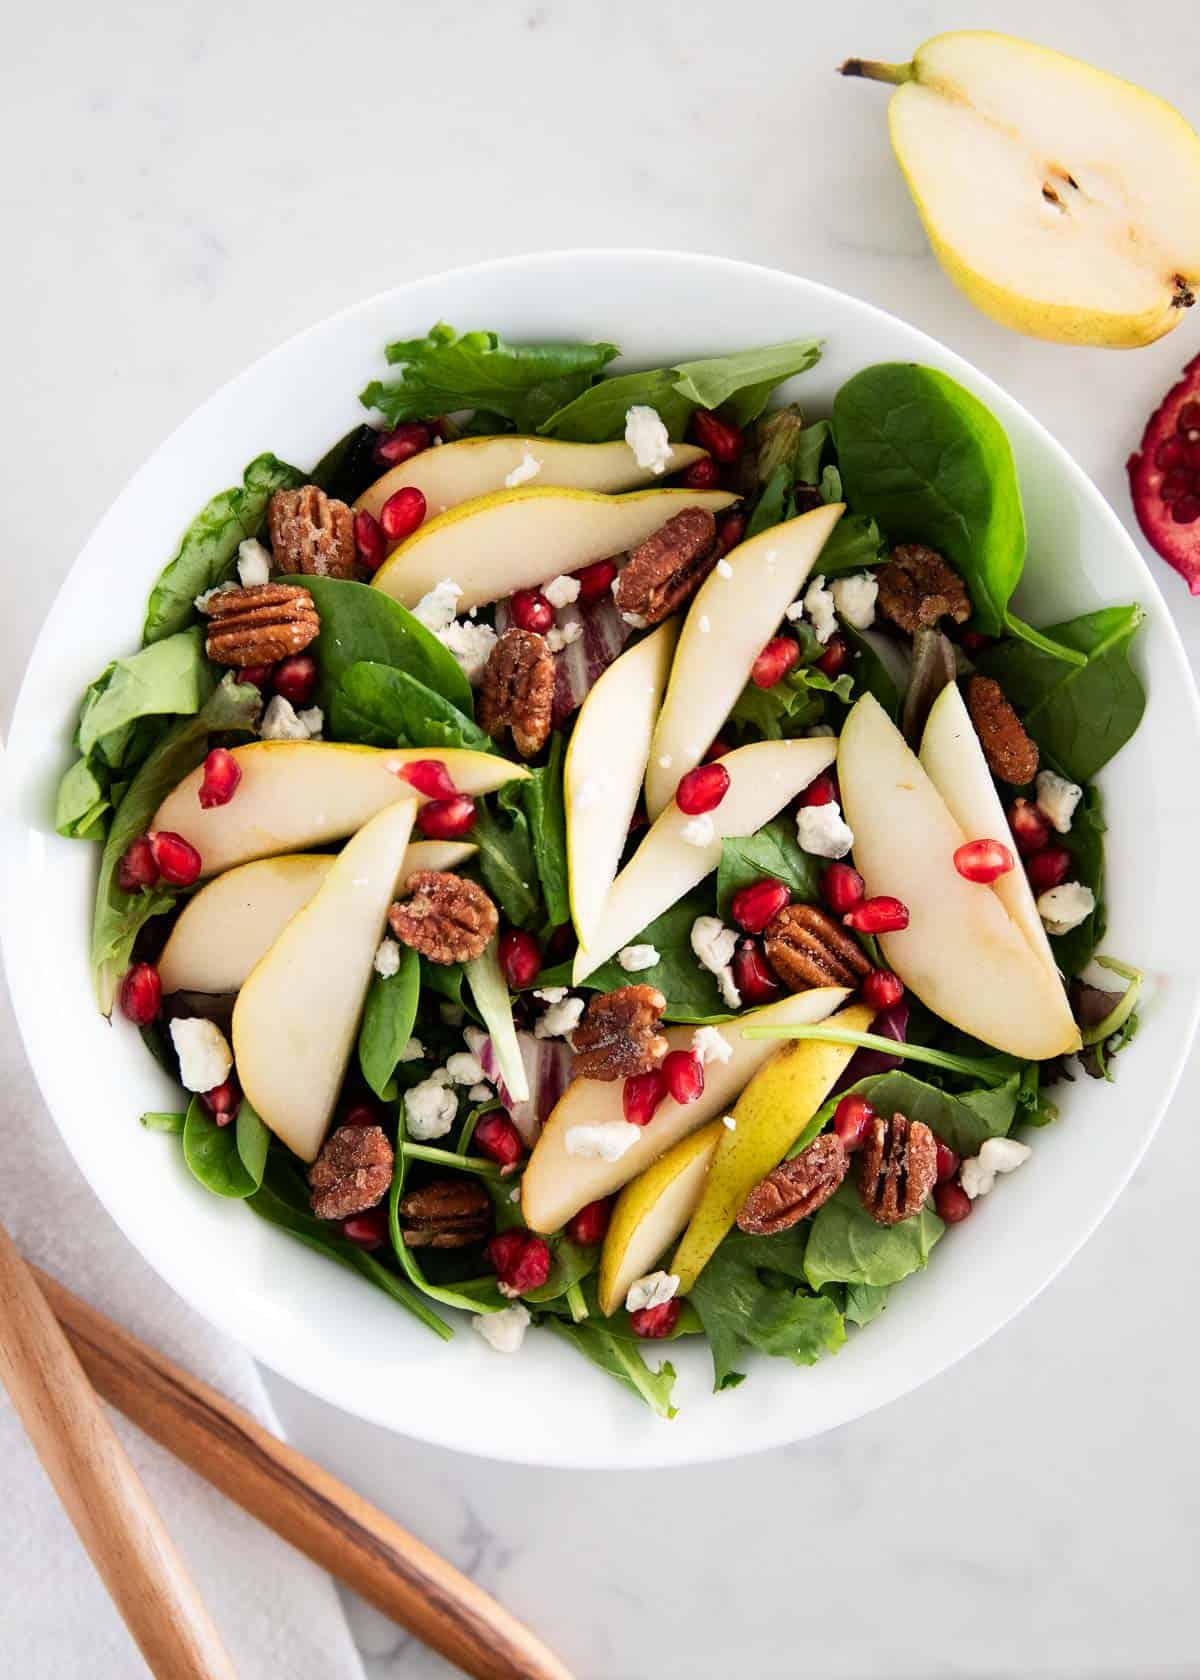 Pear and pomegranate salad.